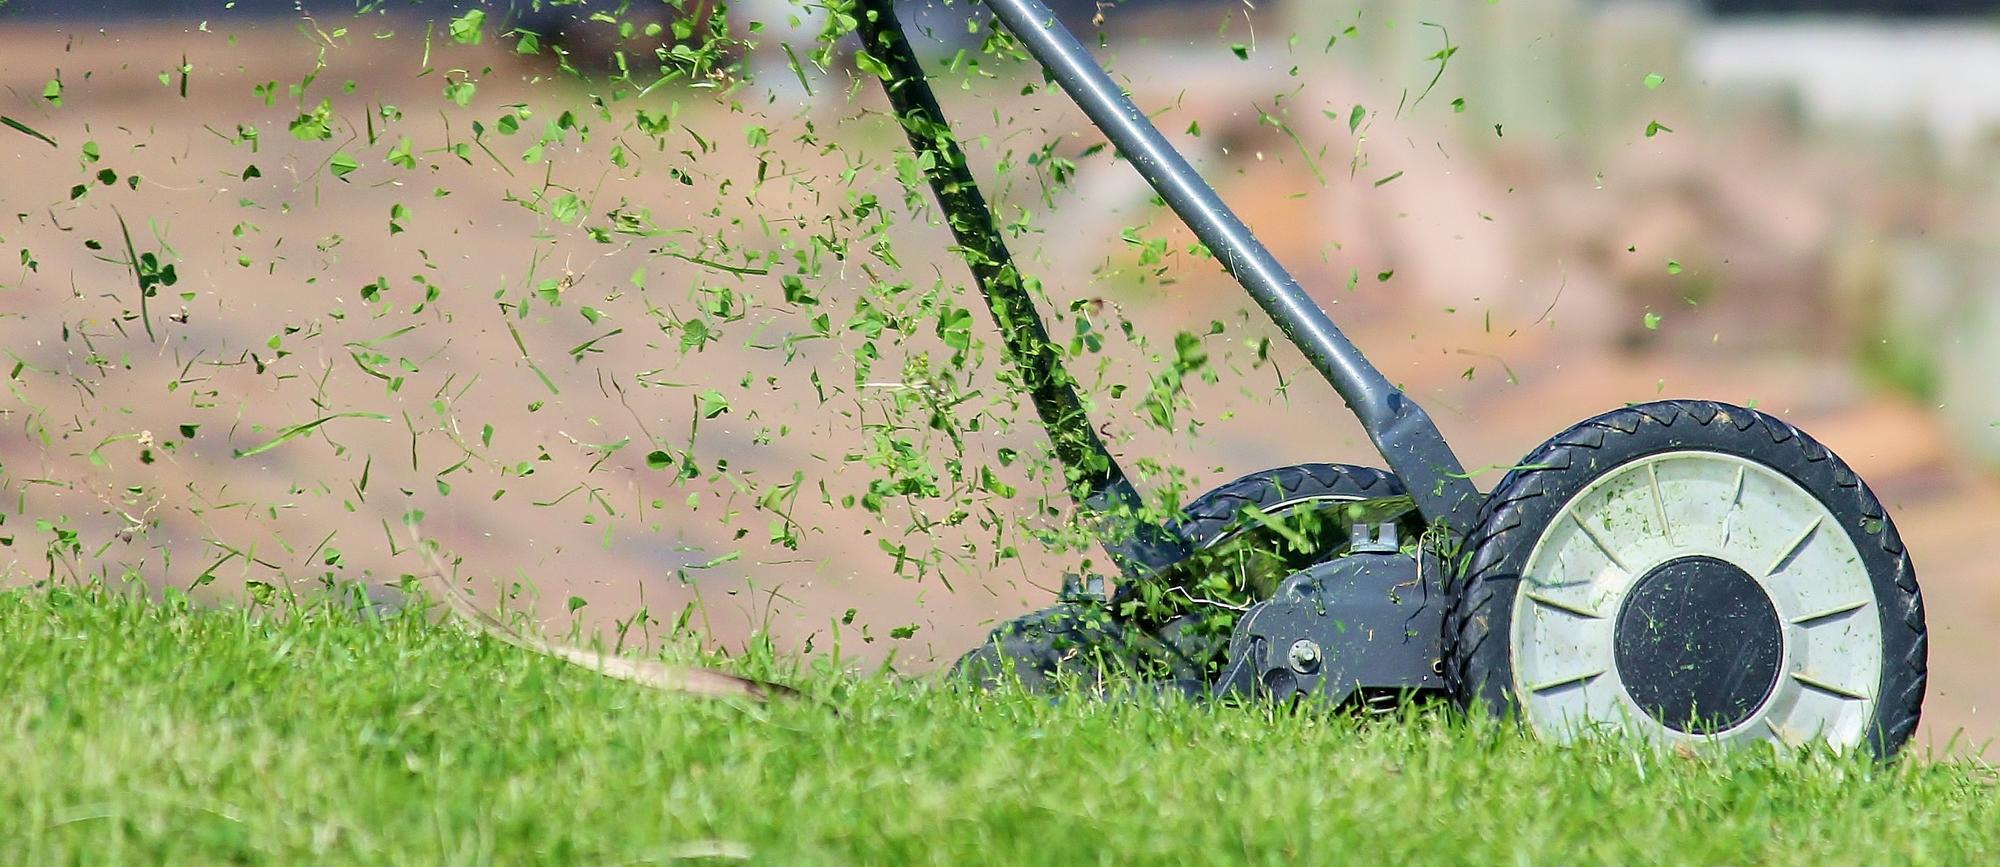 Reel mower in action with grass pieces flying up behind the reel blades.